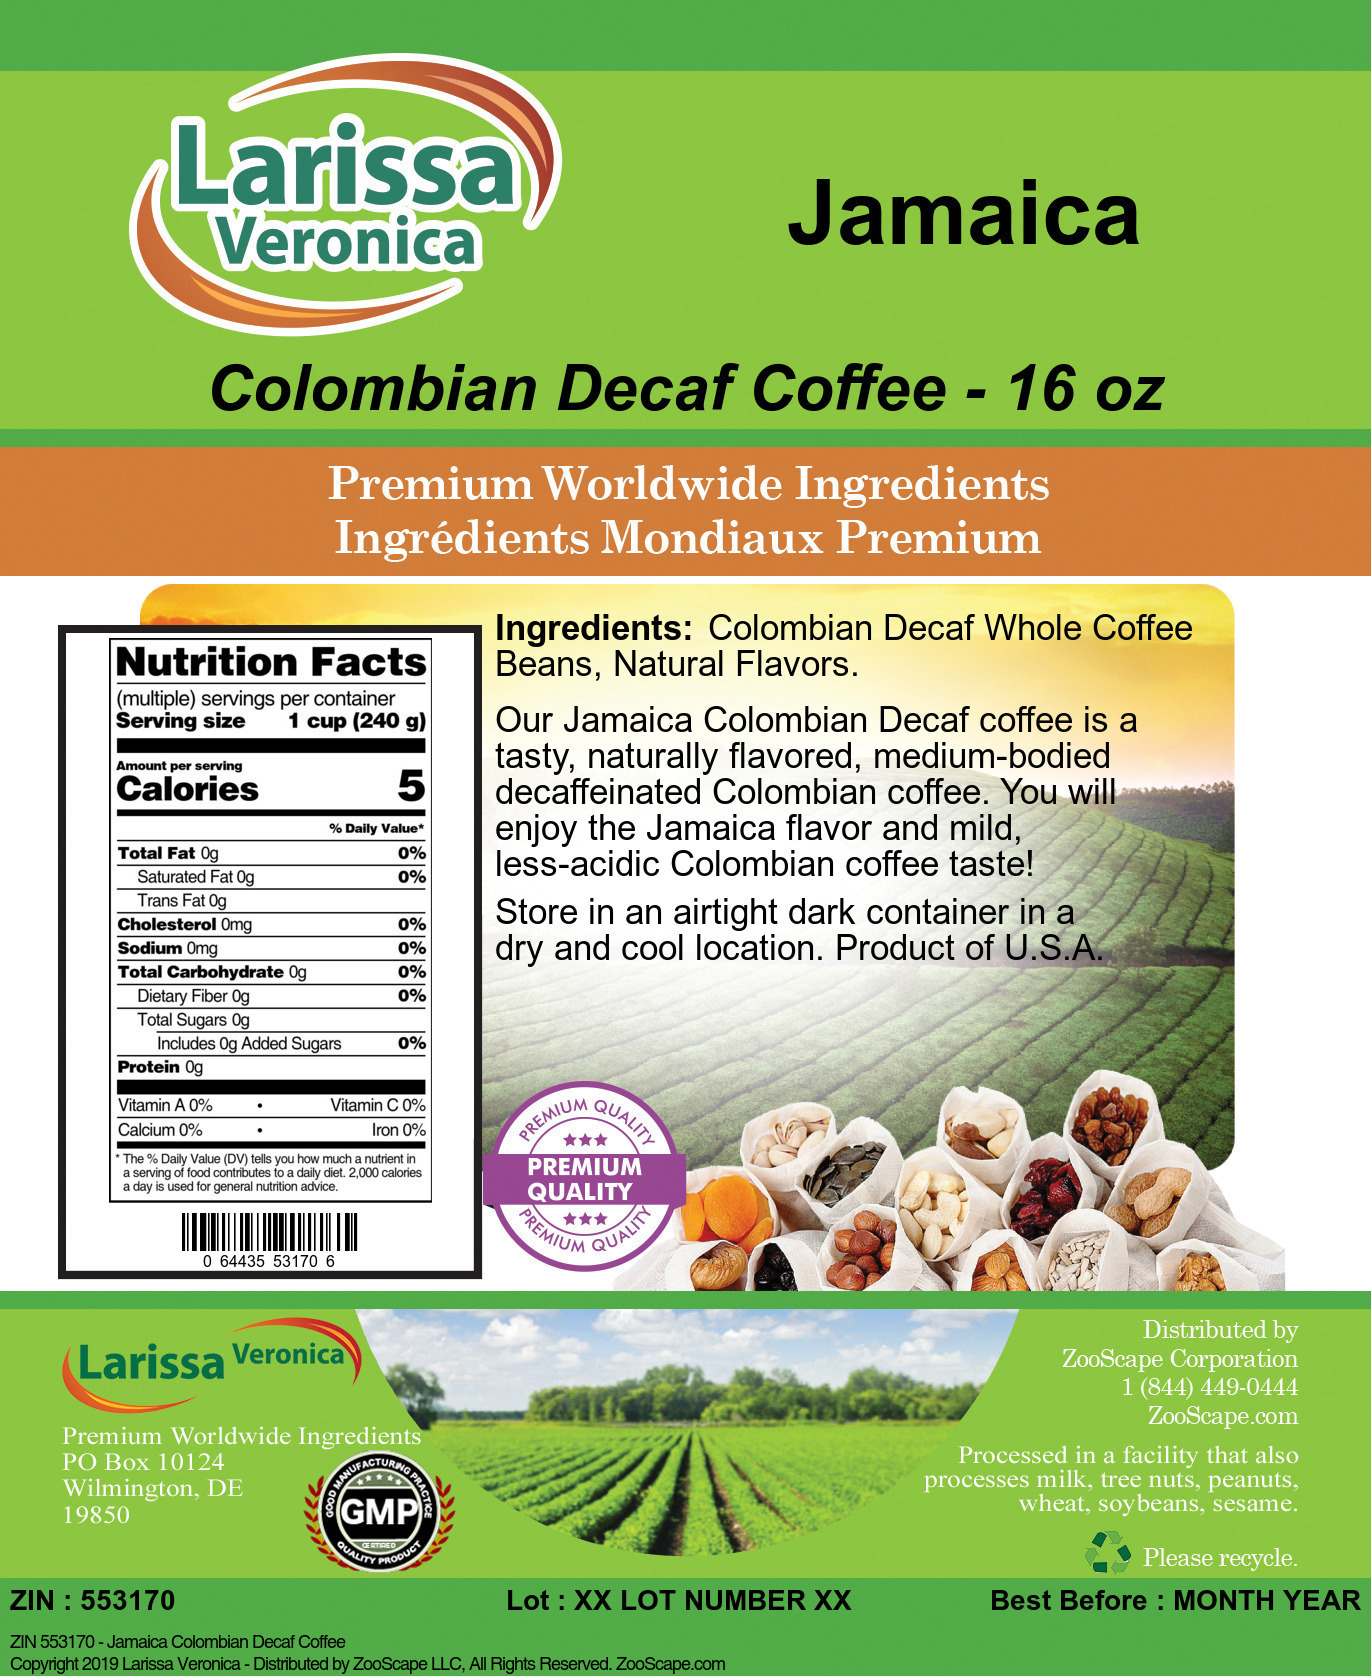 Jamaica Colombian Decaf Coffee - Label